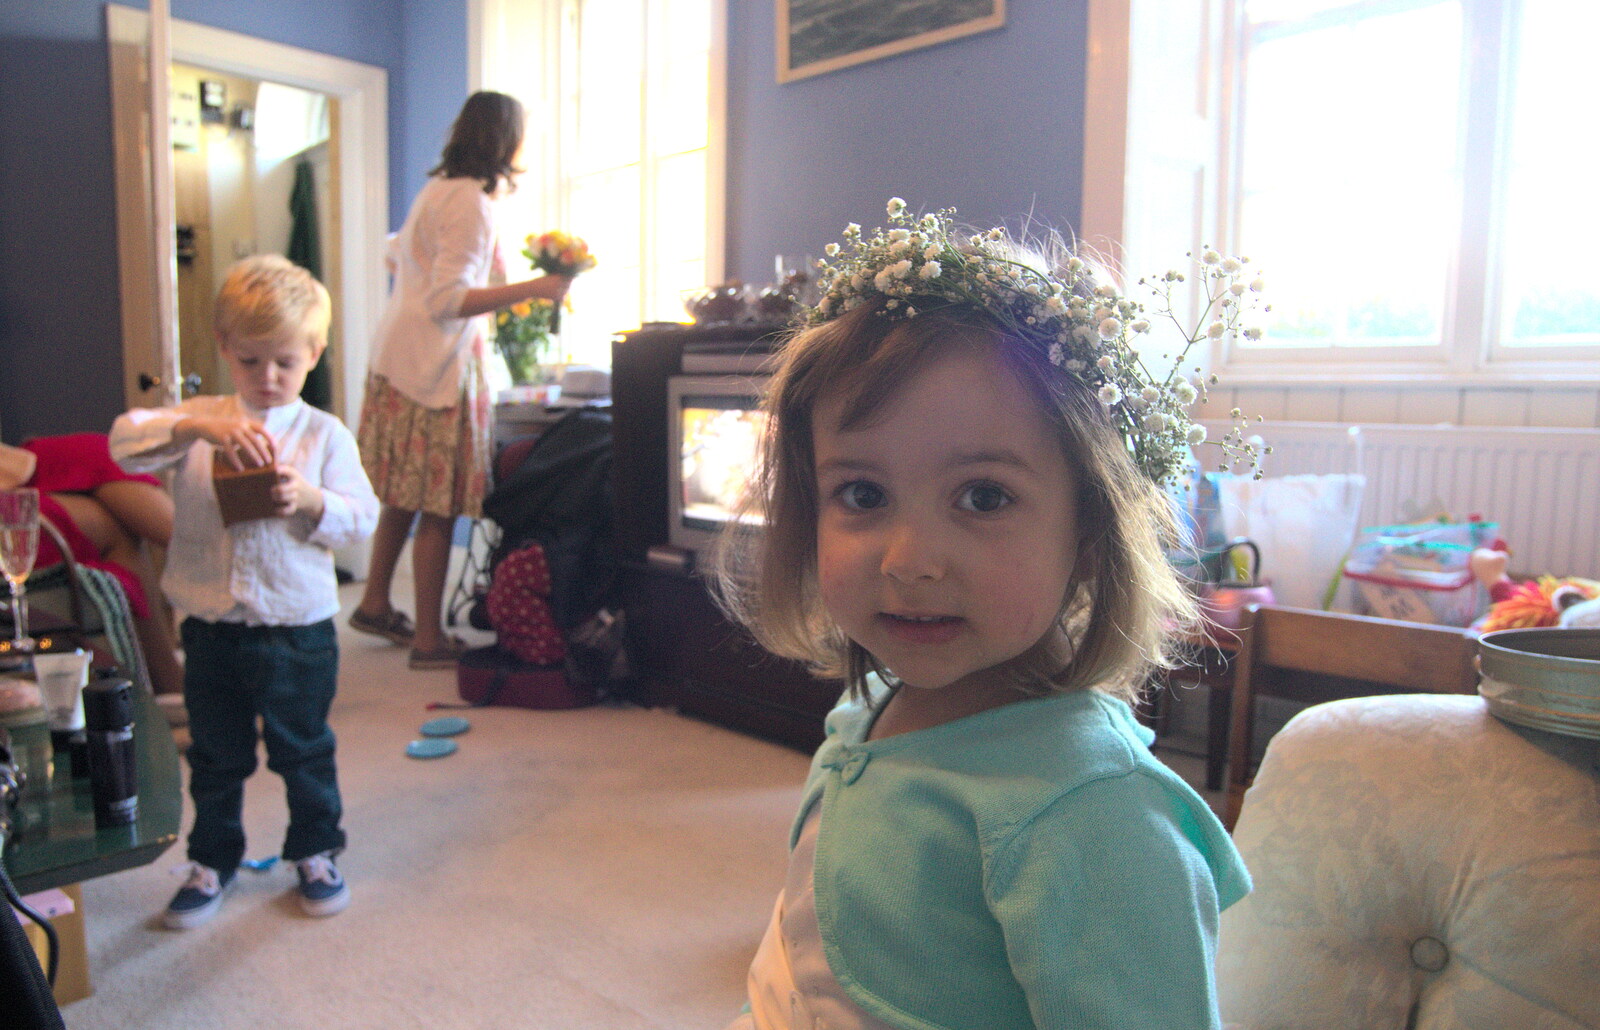 Annalua with her crown of flowers from James and Haryanna's Wedding, Grand Canal Dock, Dublin - 15th April 2015